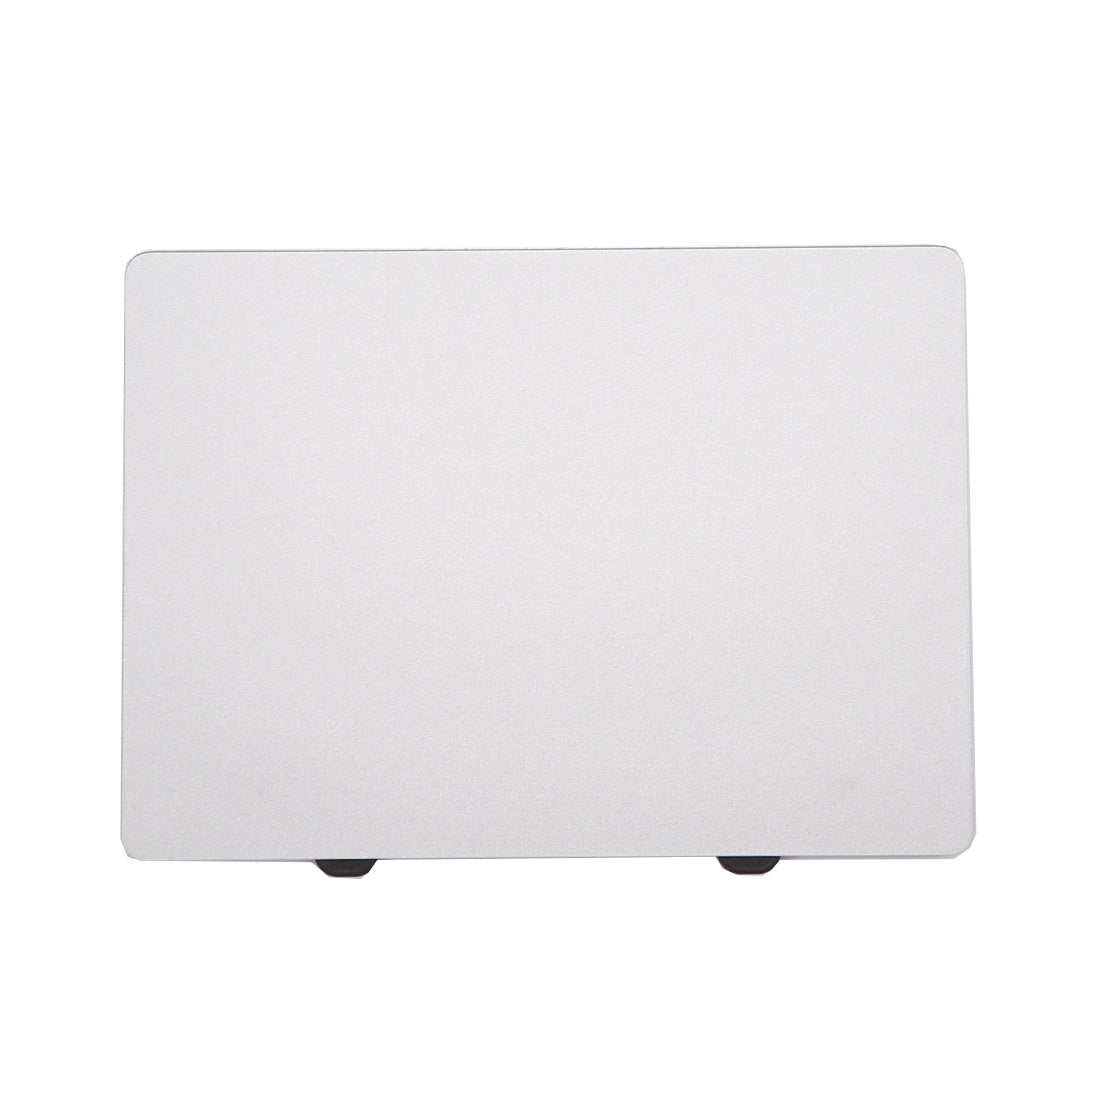 TouchPad Touchpad Apple MacBook Pro 15.4 A1398 2012 2013